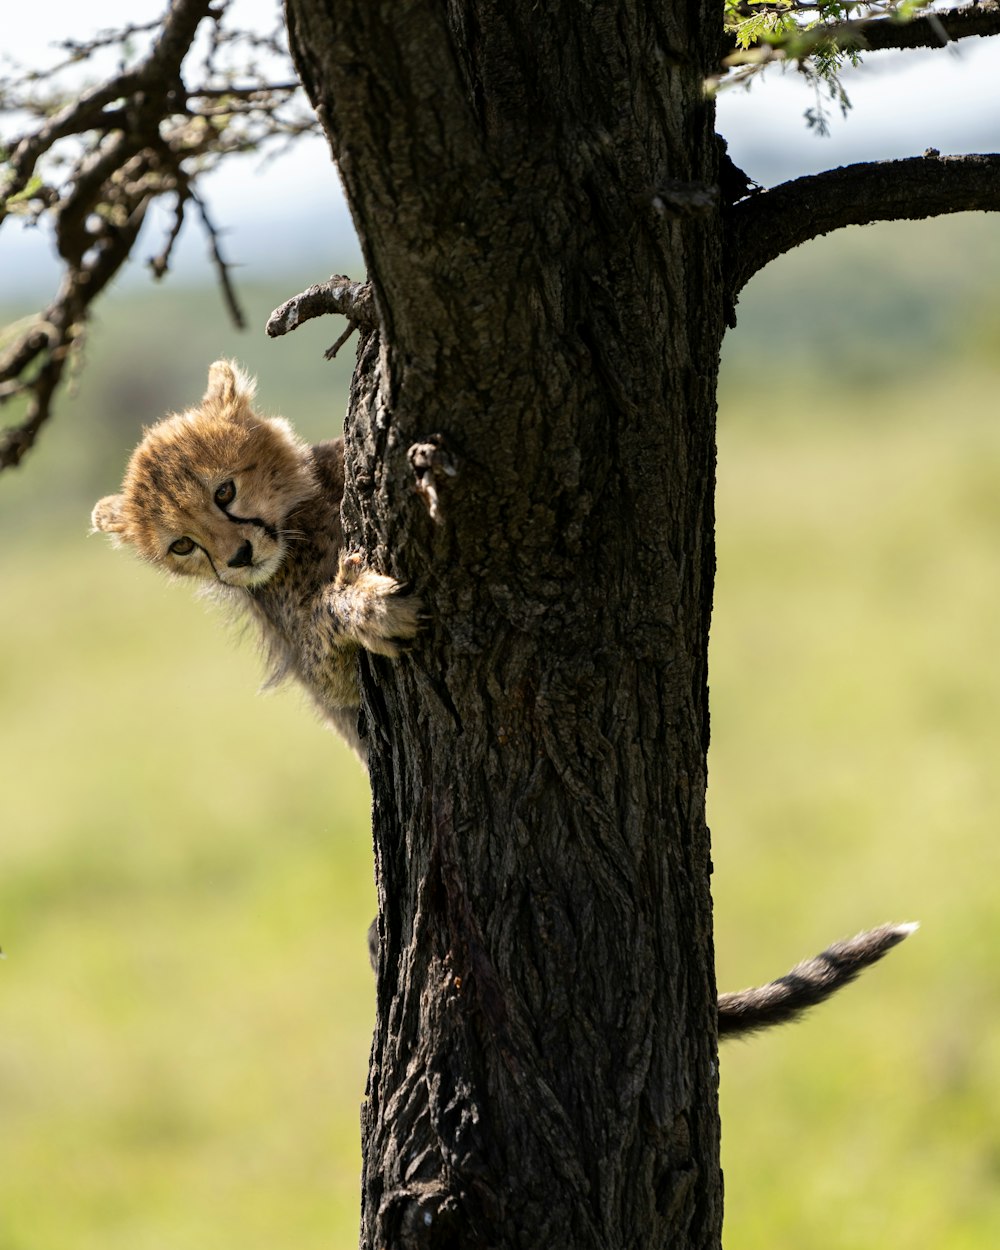 a small kitten climbing up the side of a tree